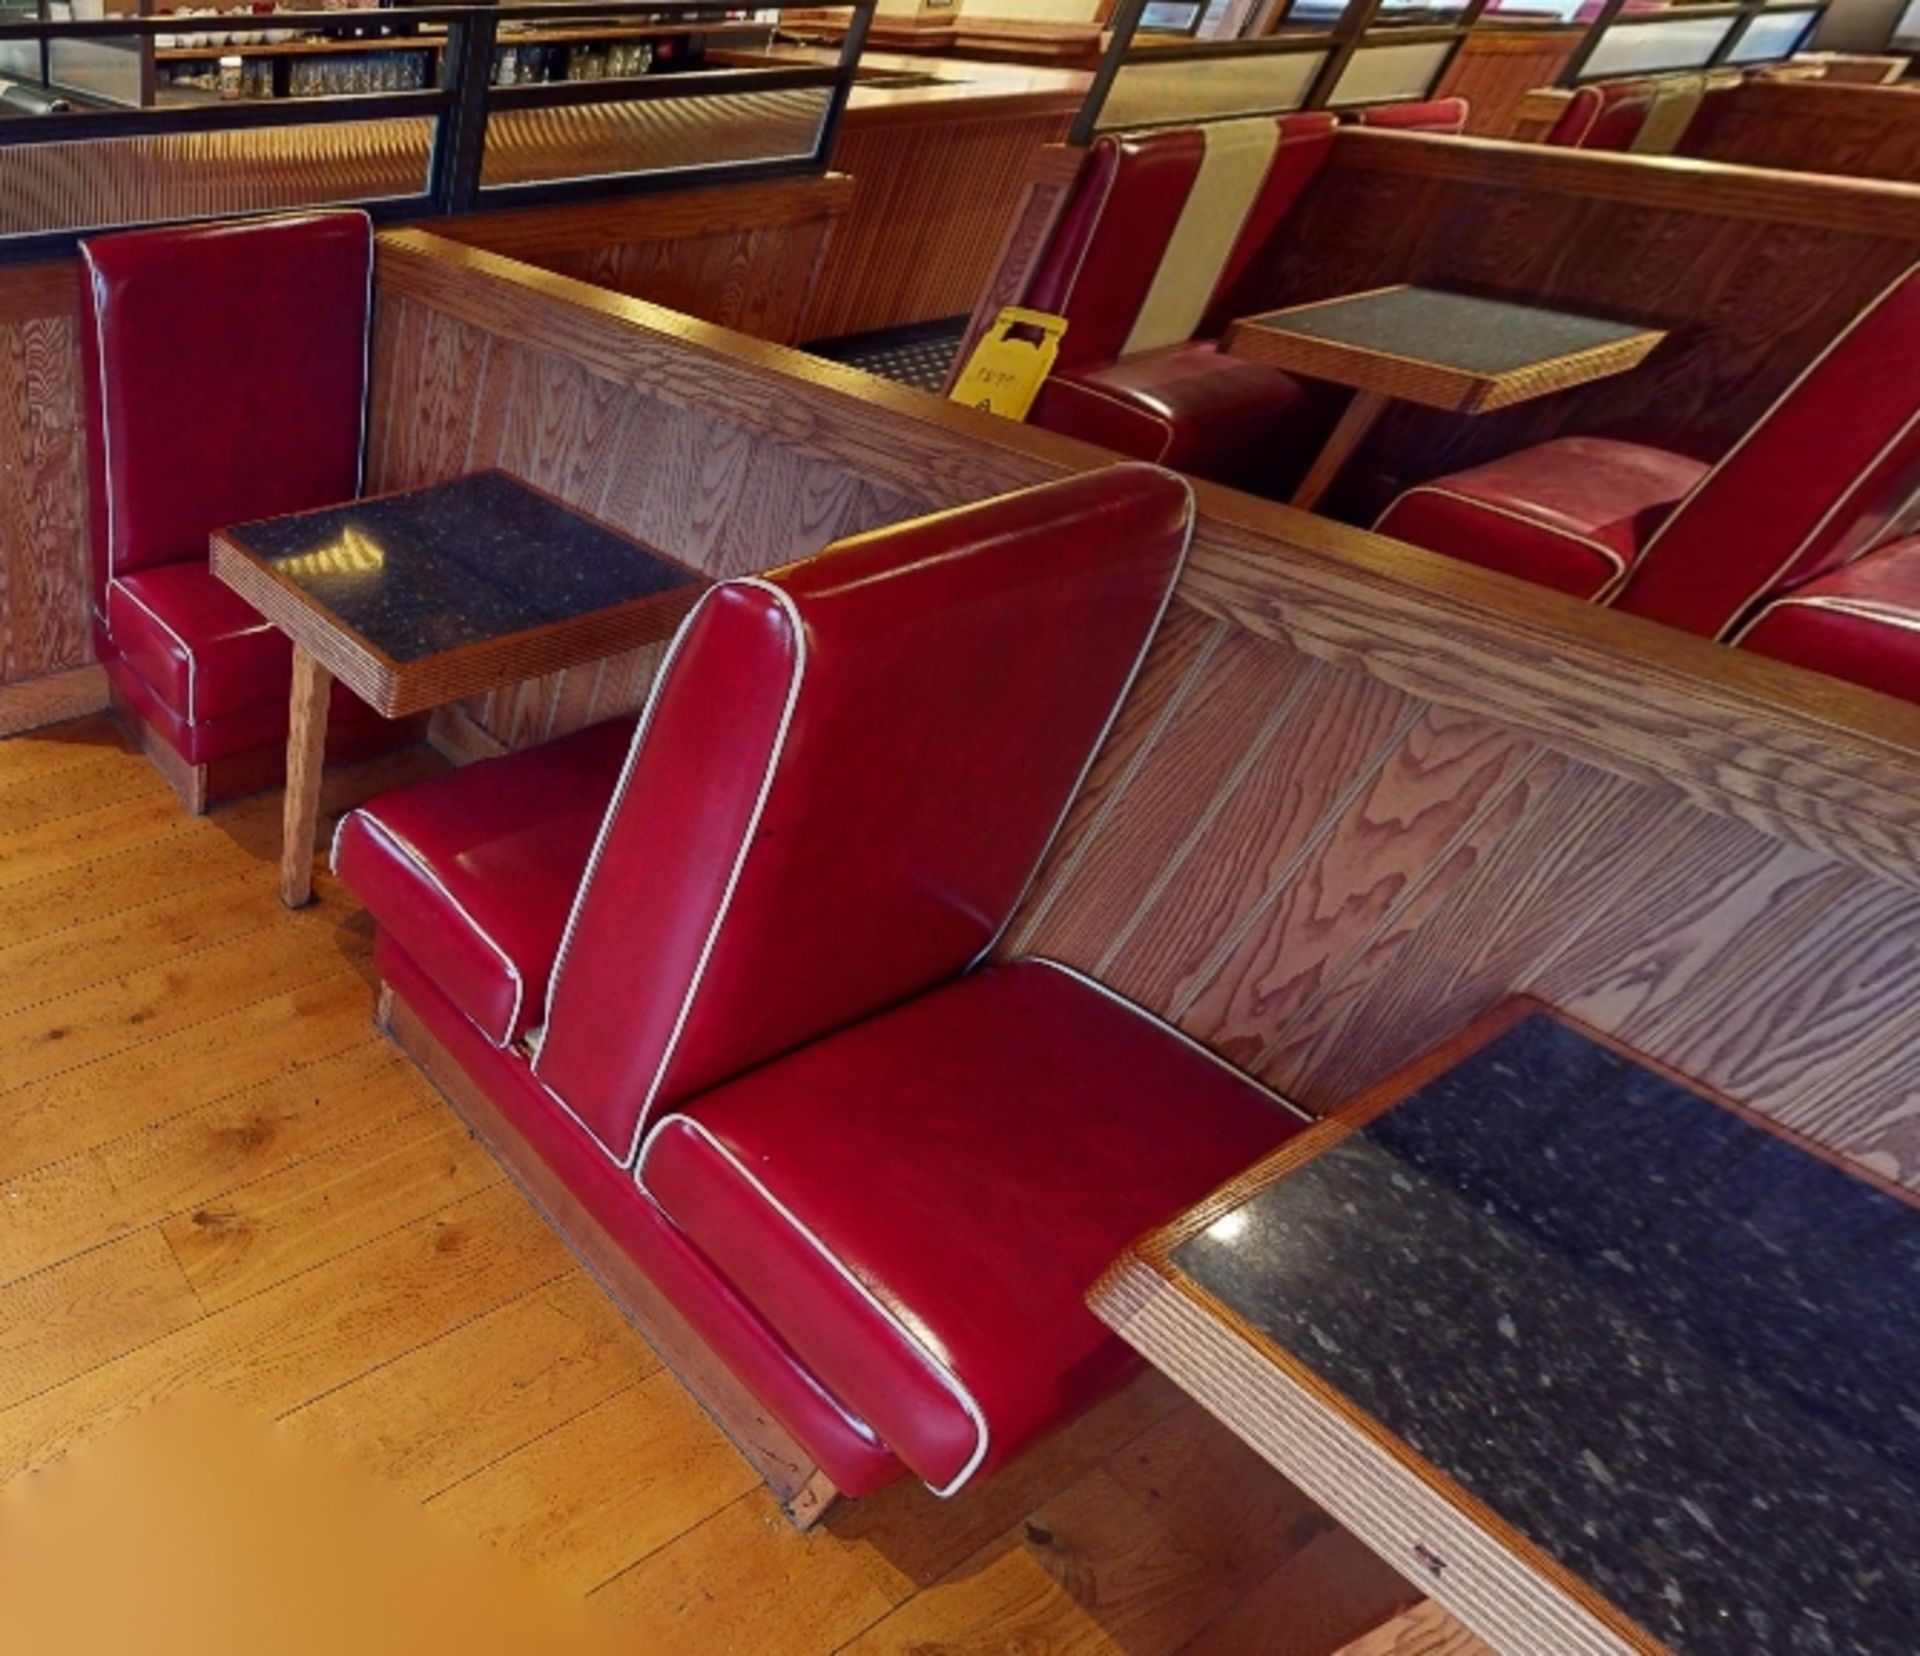 Selection of Single Seating Benches and Dining Tables to Seat Upto 10 Persons - Retro - 1950's - Image 5 of 6